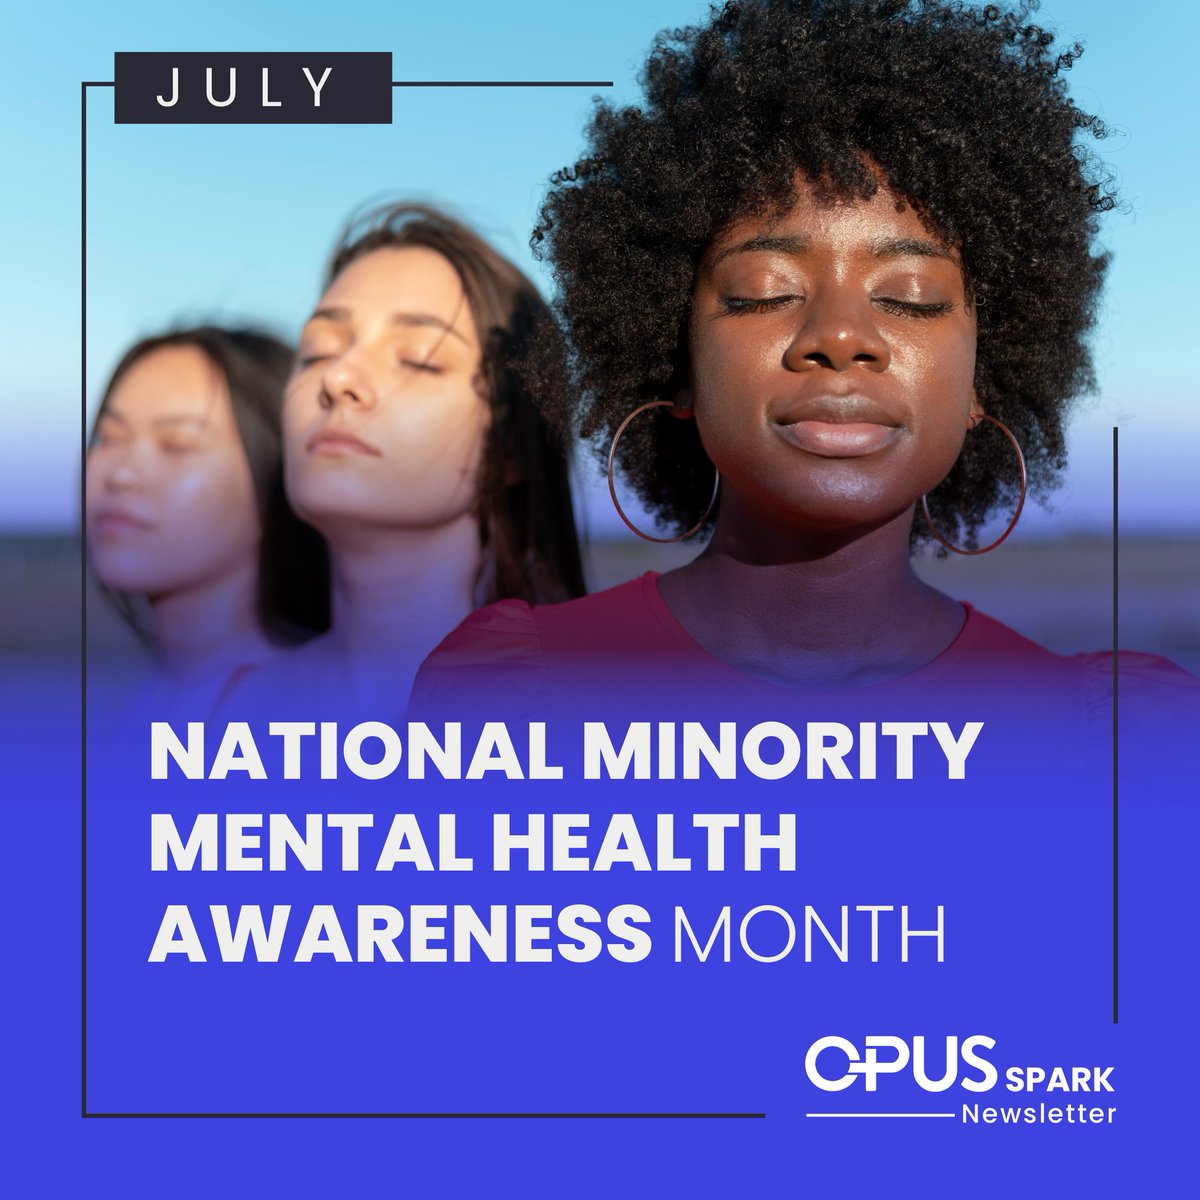 🌟 Join us in Honoring National Minority Mental Health Awareness Month! 🌟

Read more in this month's Opus Spark News🔗 hubs.ly/Q01XZ8pM0

#MinorityMentalHealthAwareness #InclusivityInMentalHealth #OpusEHR #EqualAccessToCare #MentalHealth #BehavioralHealth #MentalHealthNews